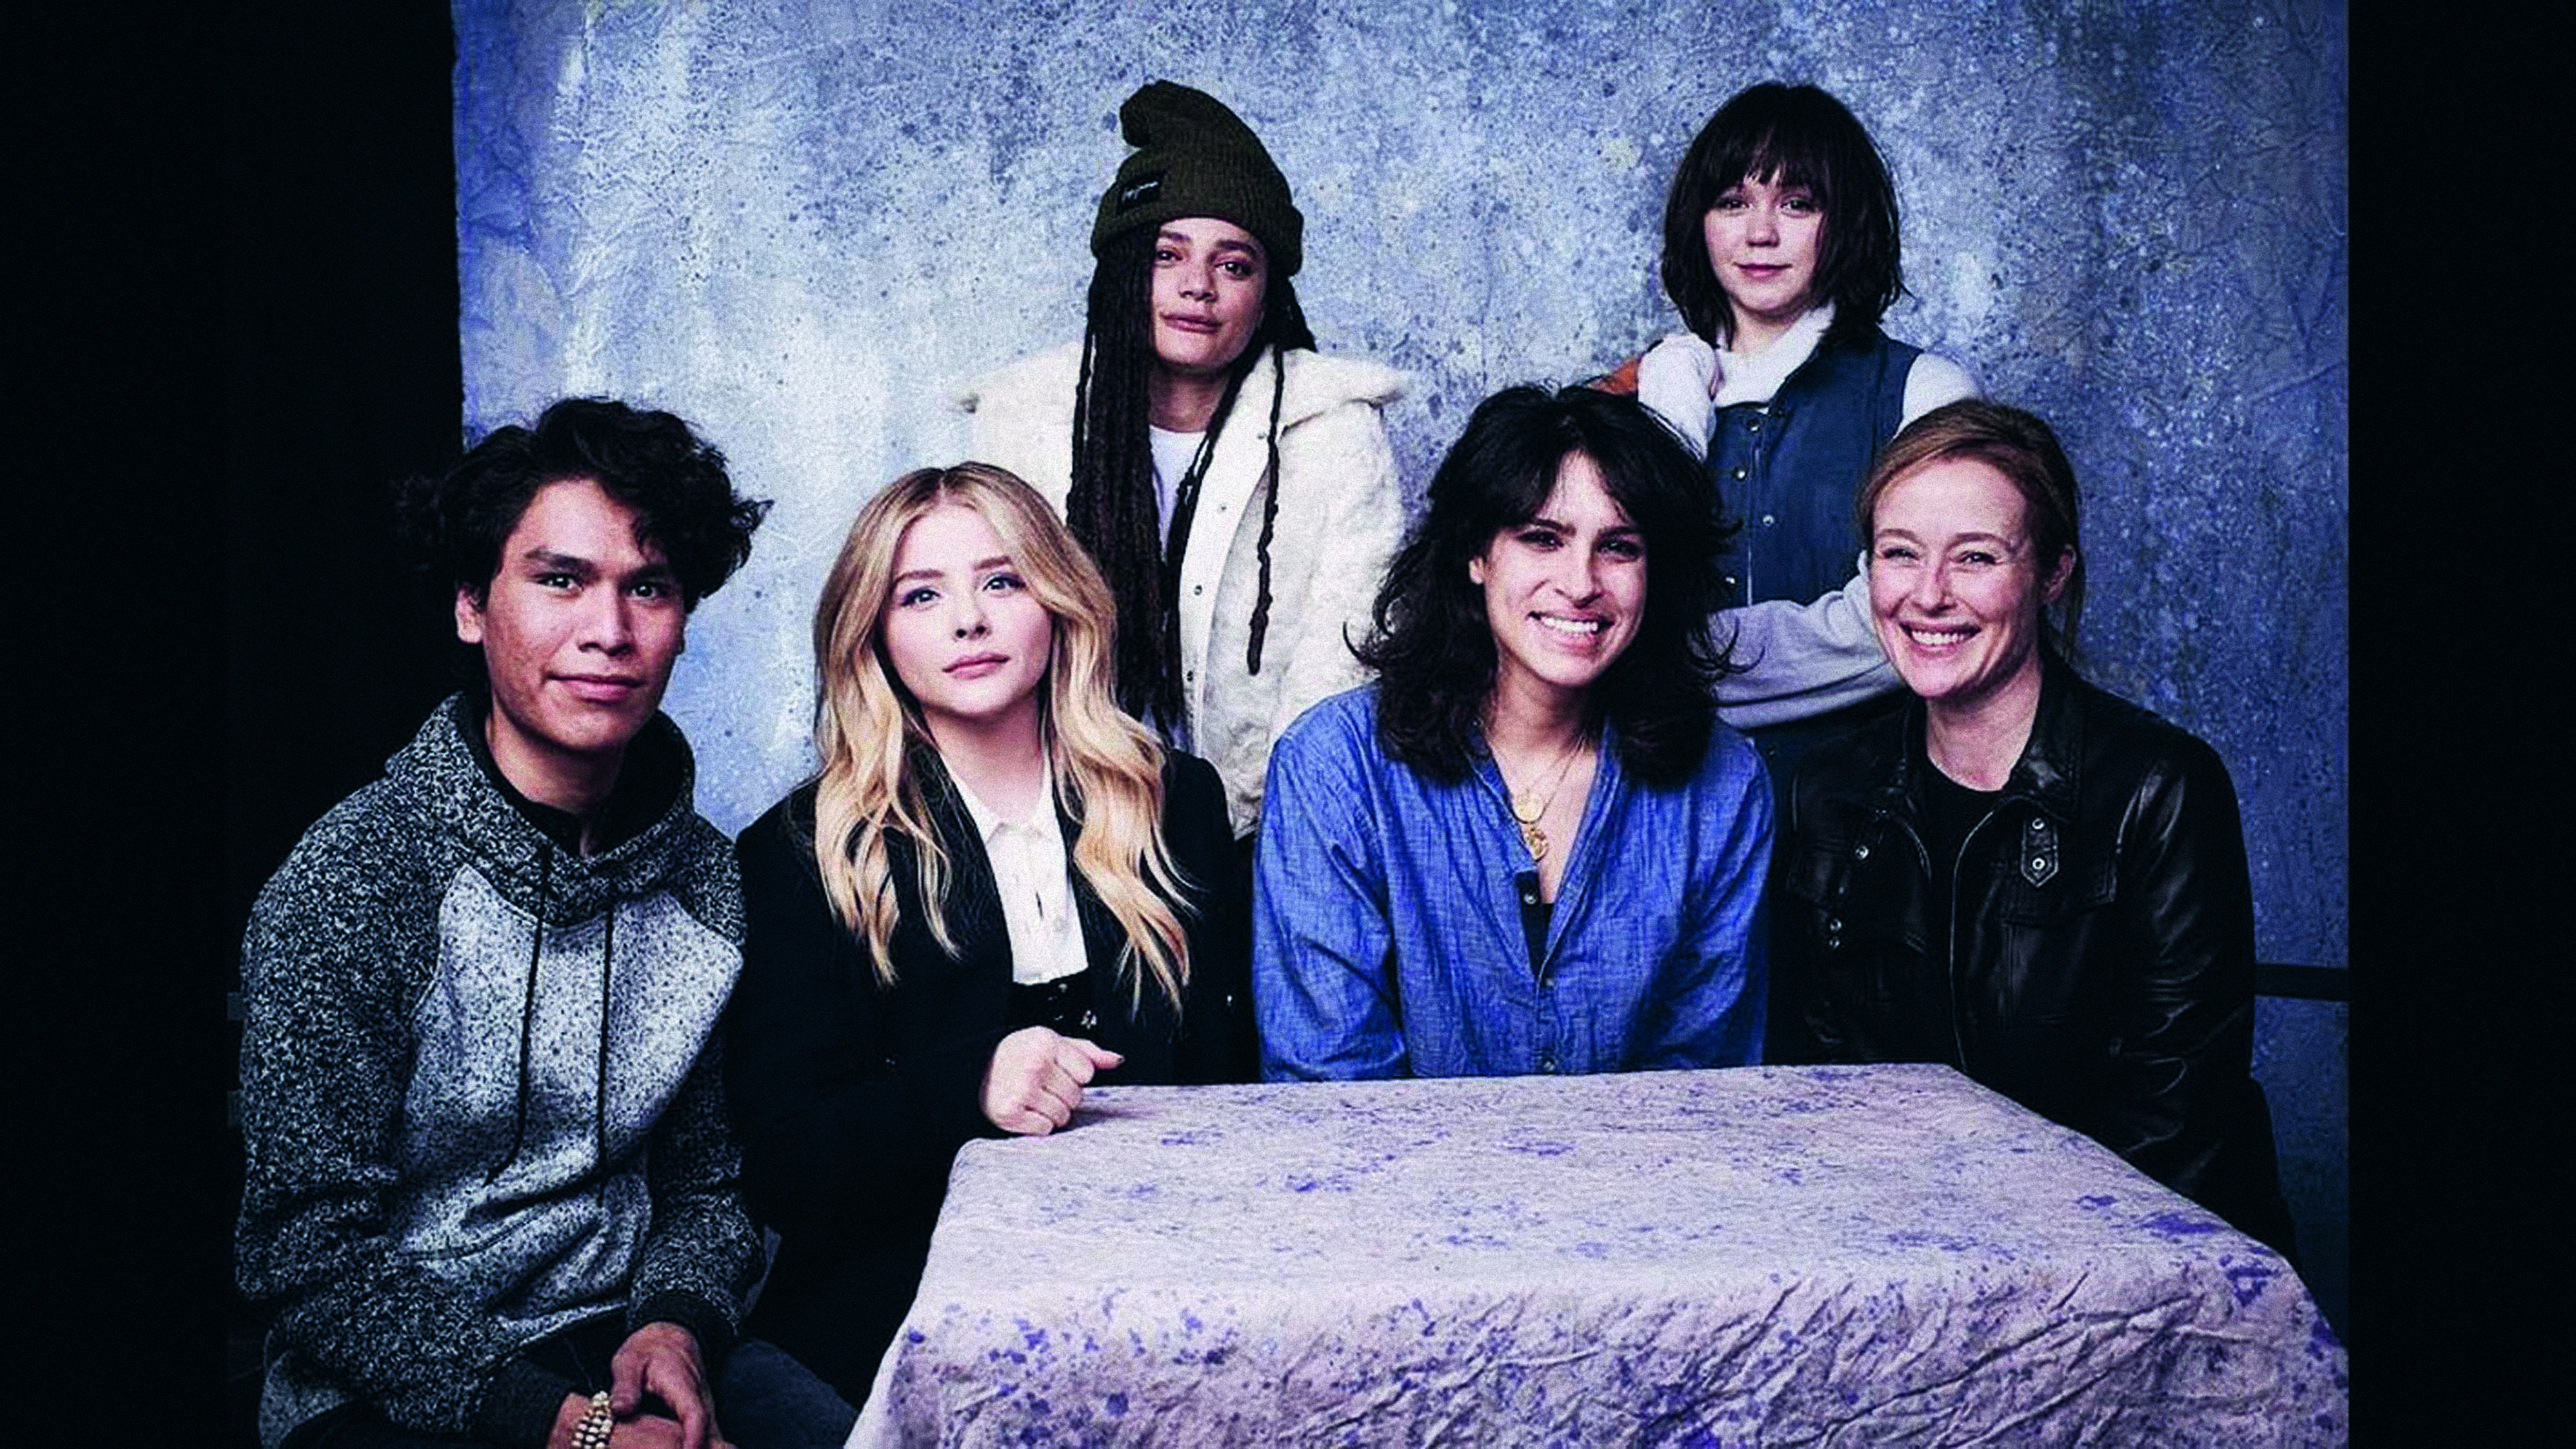 Desiree Akhavan poses with the cast of the film 'The miseducation Of Cameron Post'